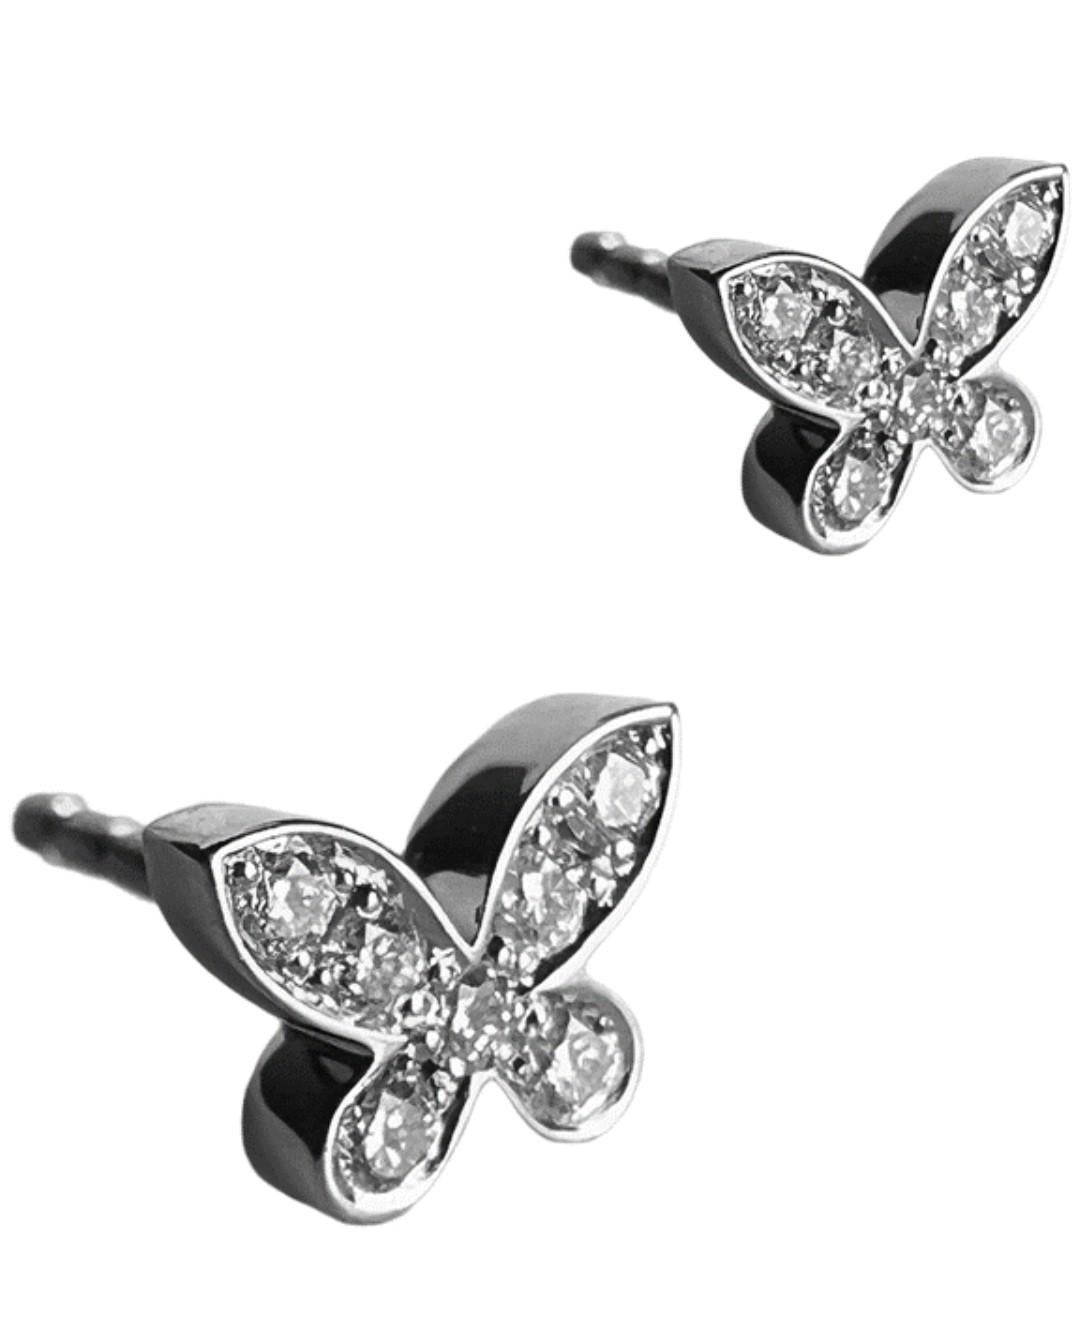 Ekos Gem 18 Carat White Gold and Diamond Butterfly Stud Earrings.  

Materials:
18K yellow gold 1.30 gr / Diamonds 0.15 ct Total Weight (14 stones) , VS-SI , E-F
Dimensions: 
Length 4.90 mm / Width 6.25 mm

Please note that each piece is